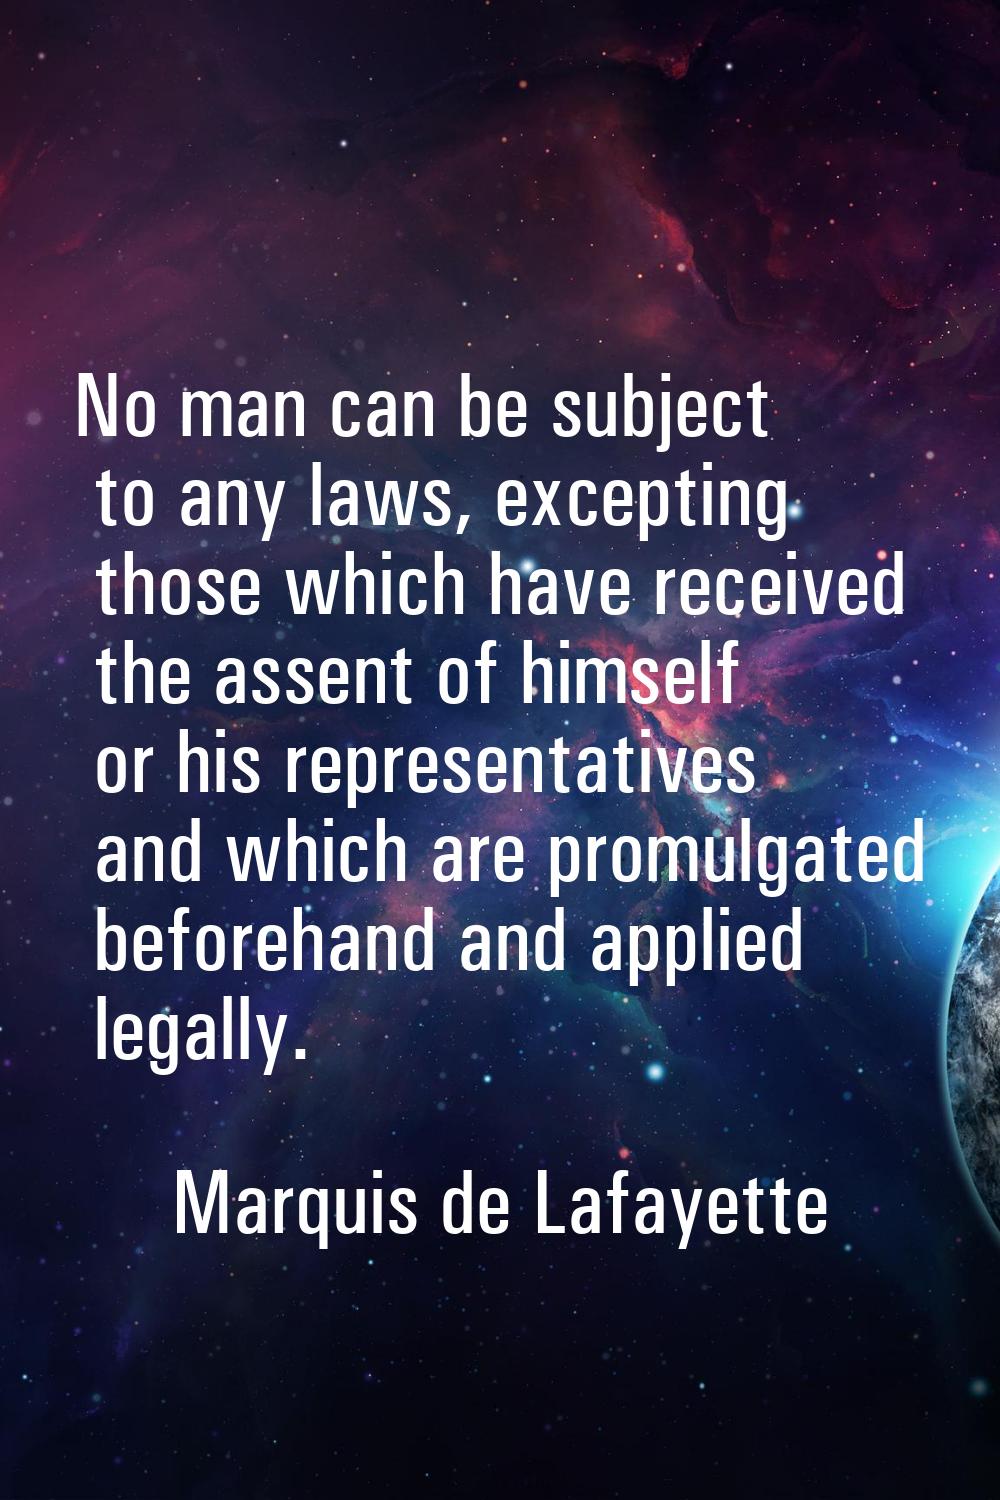 No man can be subject to any laws, excepting those which have received the assent of himself or his